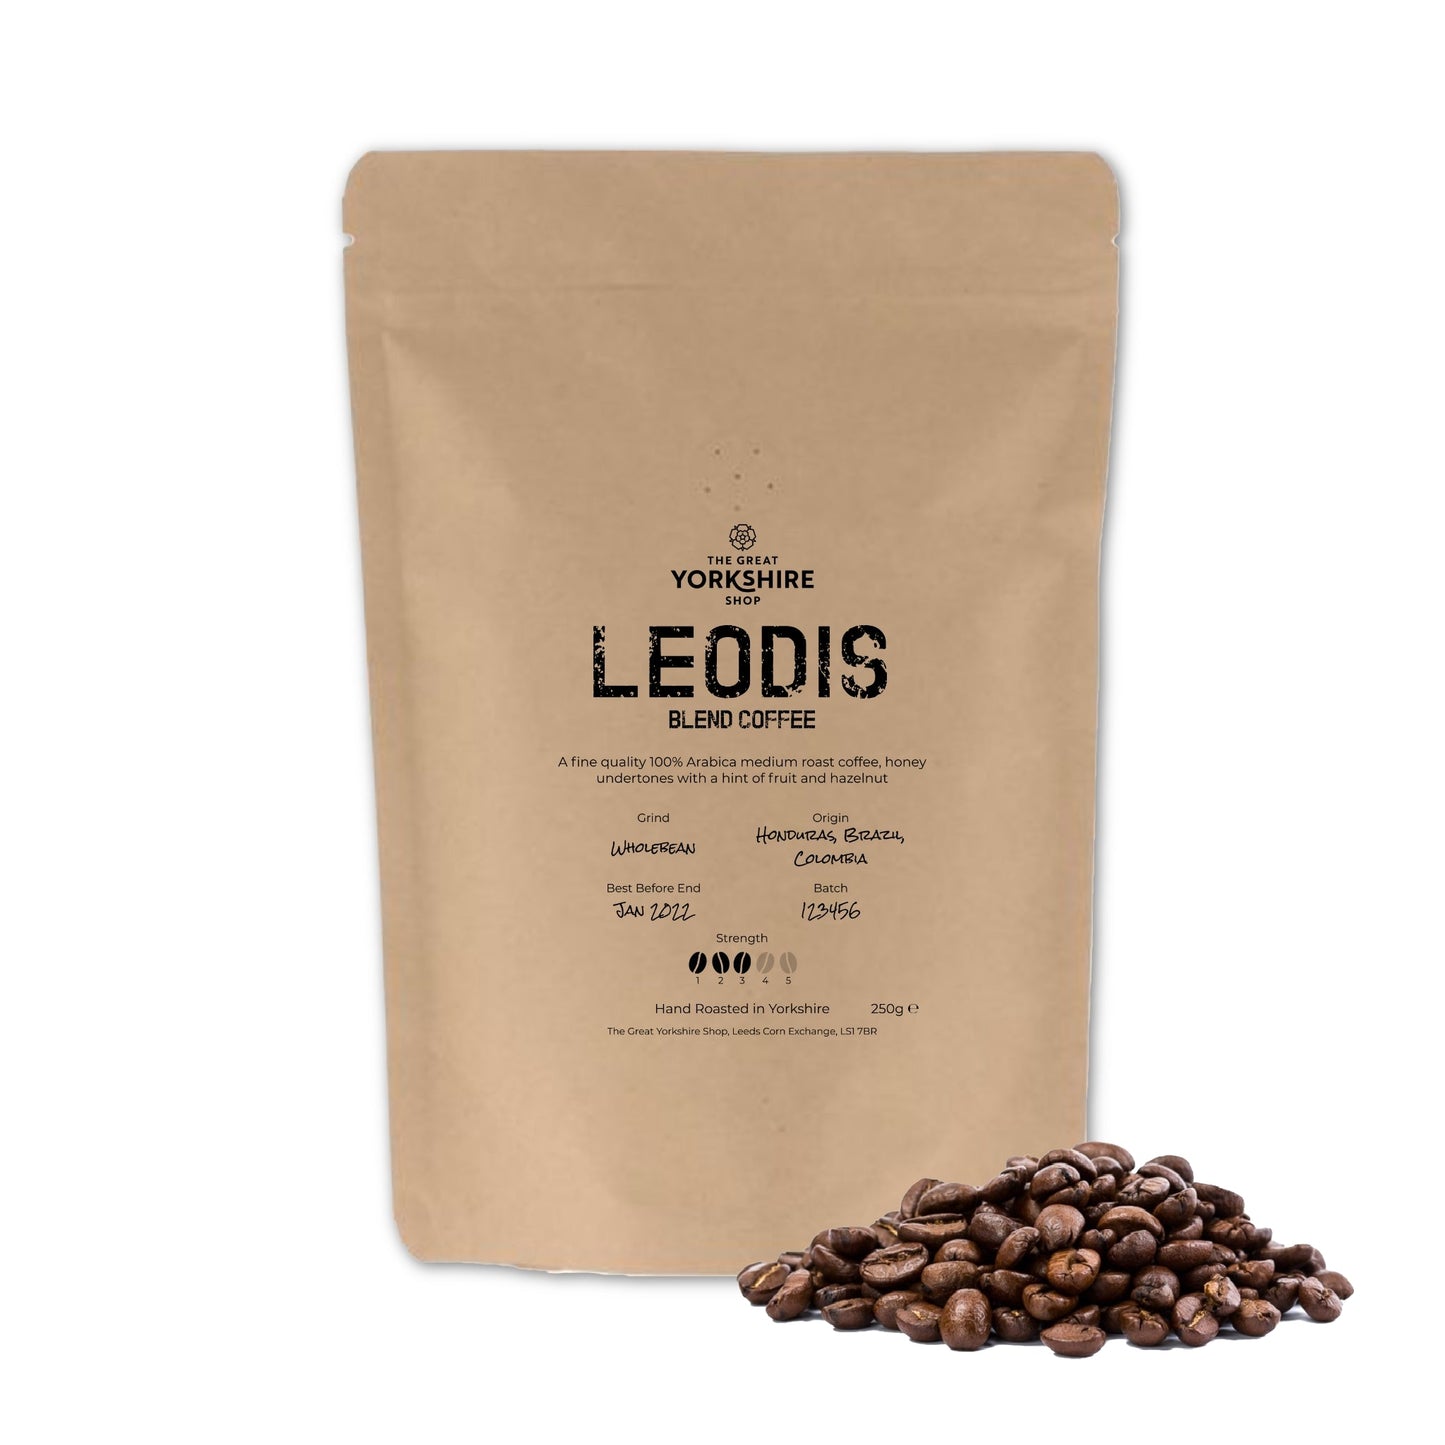 Leodis Blend Coffee - The Great Yorkshire Shop